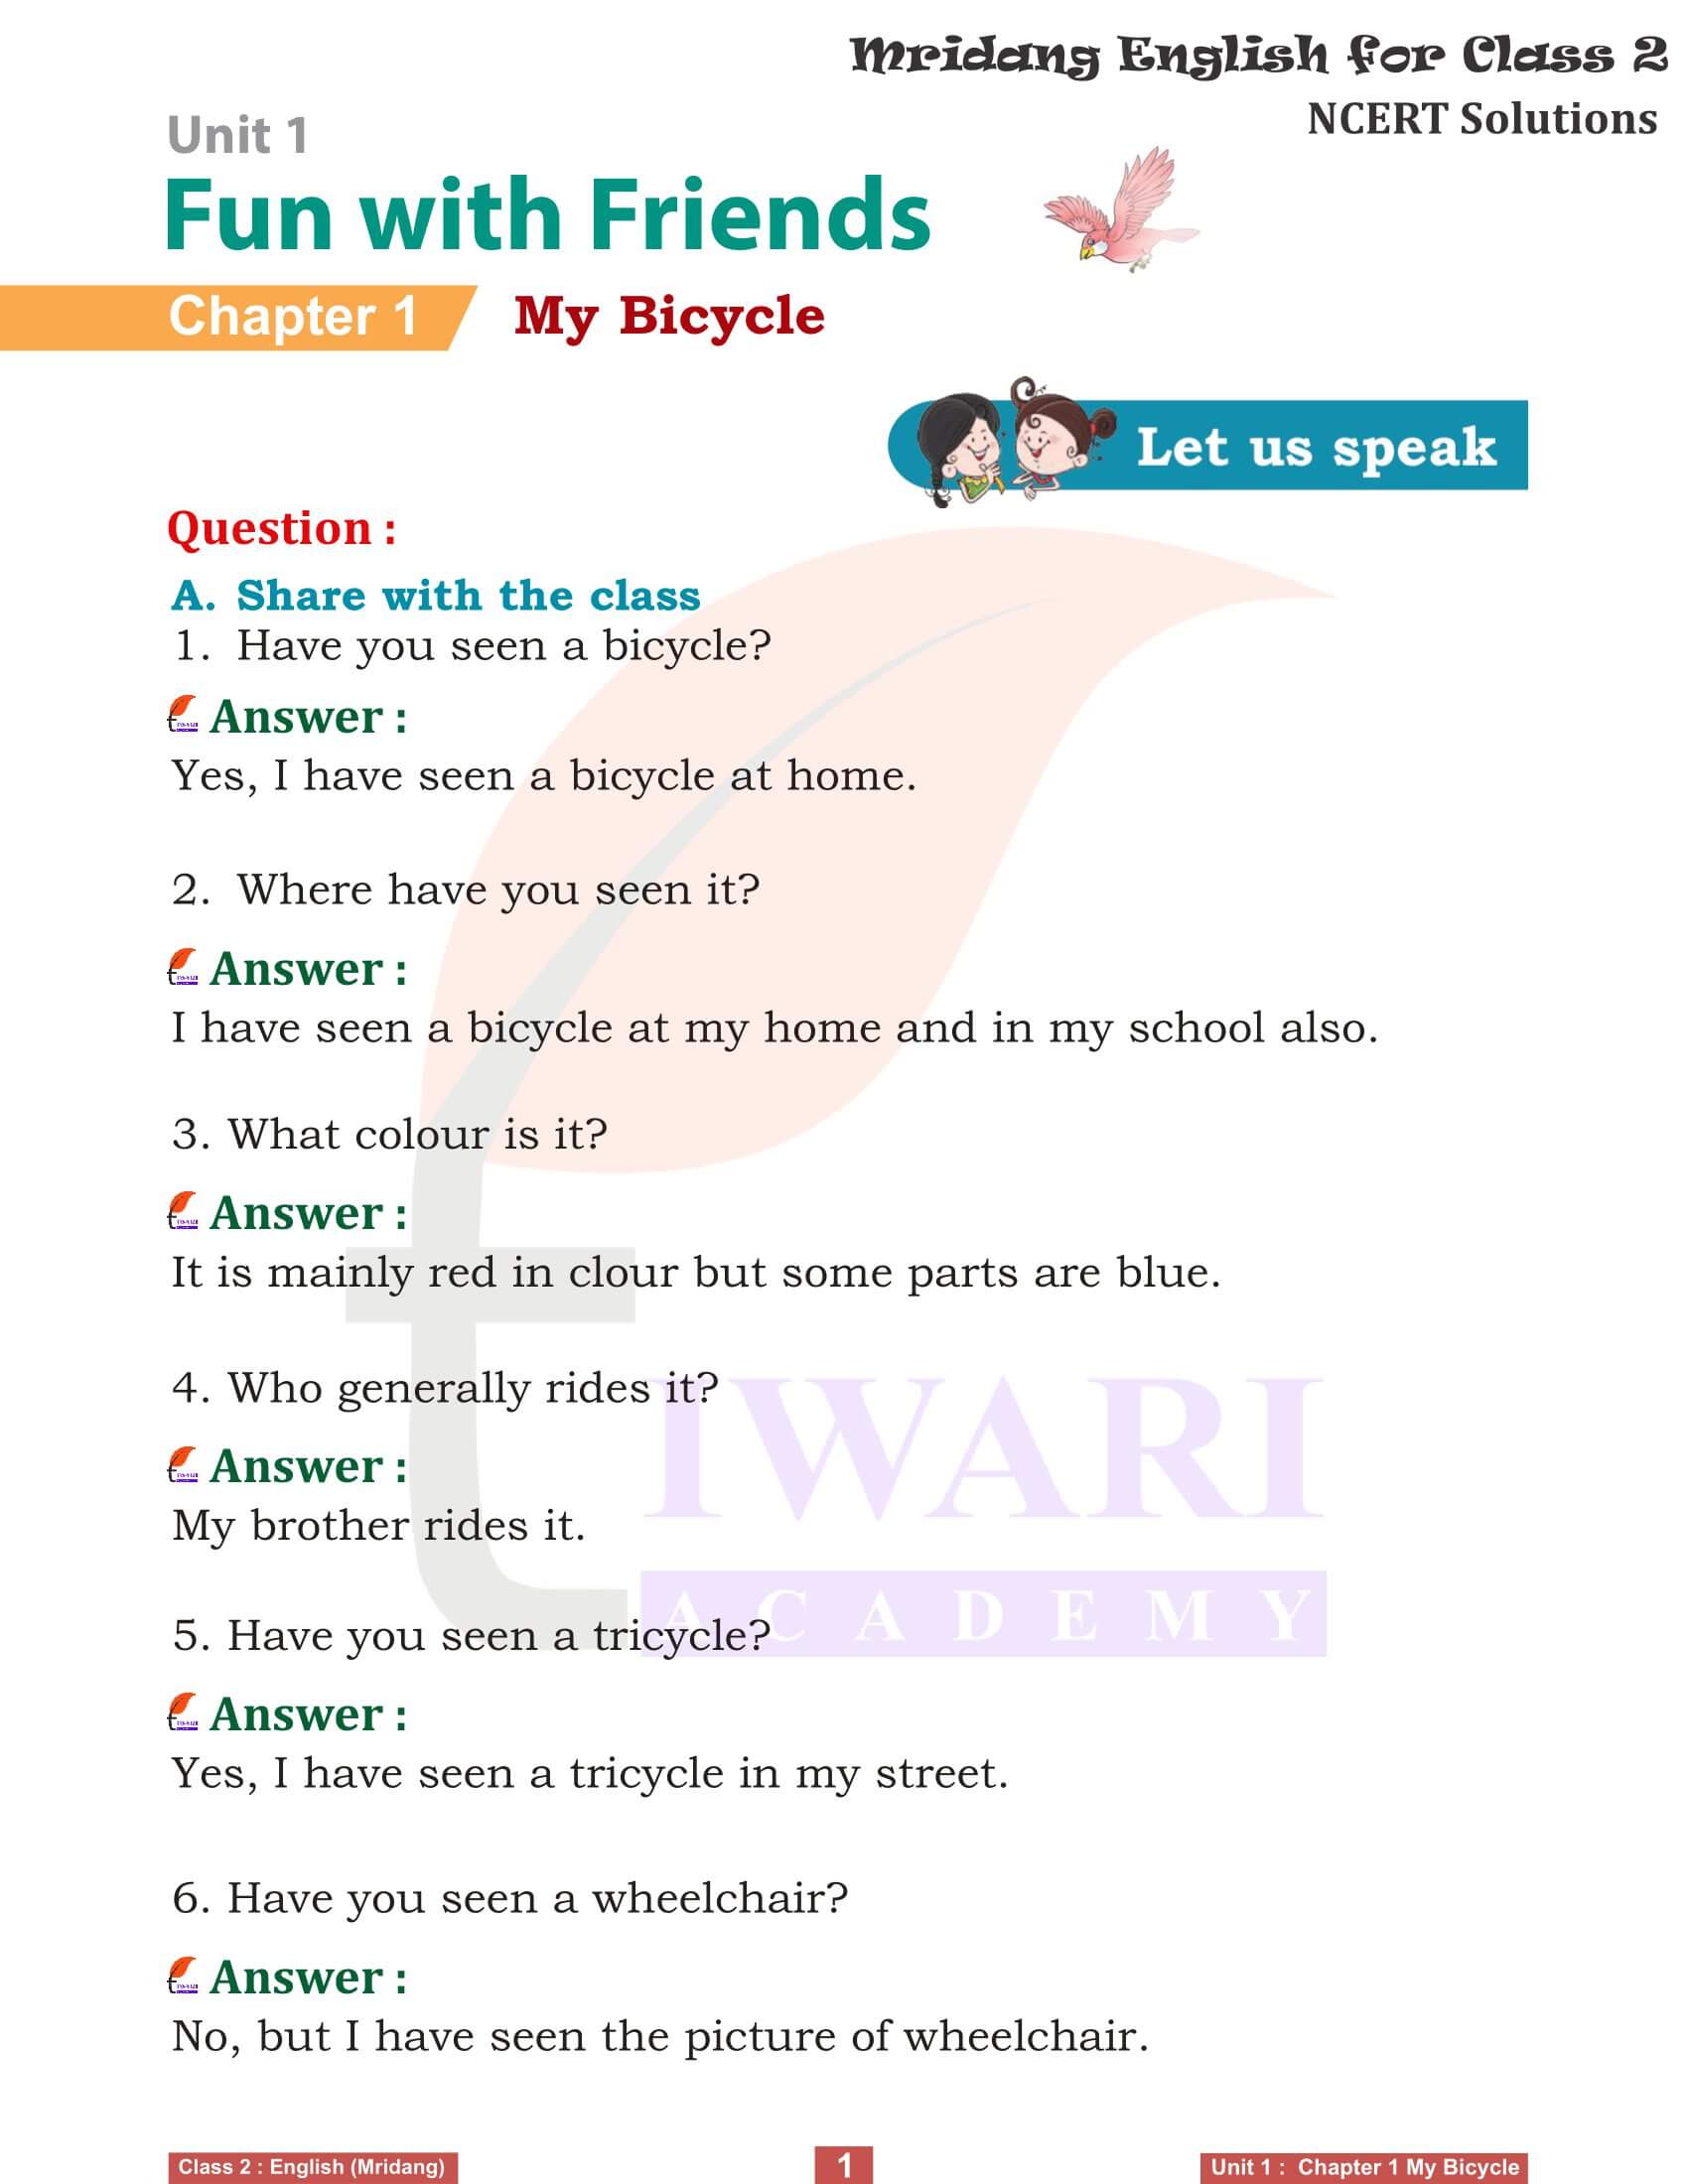 NCERT Solutions for class 2 English Mridang unit 1 Fun with Friends Chapter 1 My Bicycle